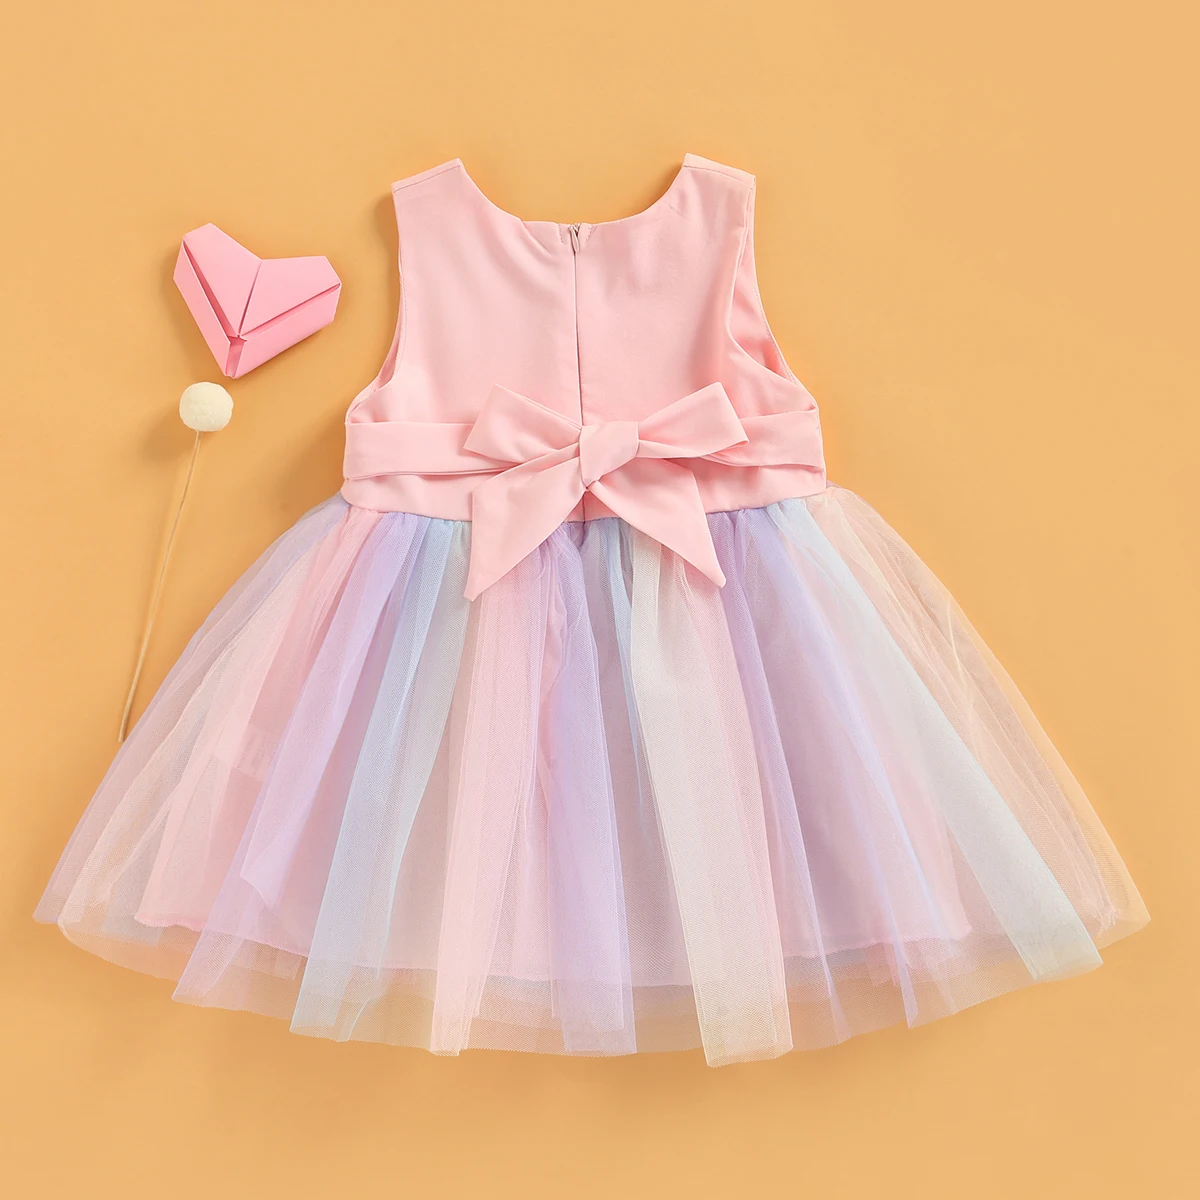 ma&baby 1-5Y Toddler Kid Baby Girl Tutu Dress Summer Bow Tulle Rainbow Party Birthday Wedding Dresses For Girls cocktail dresses